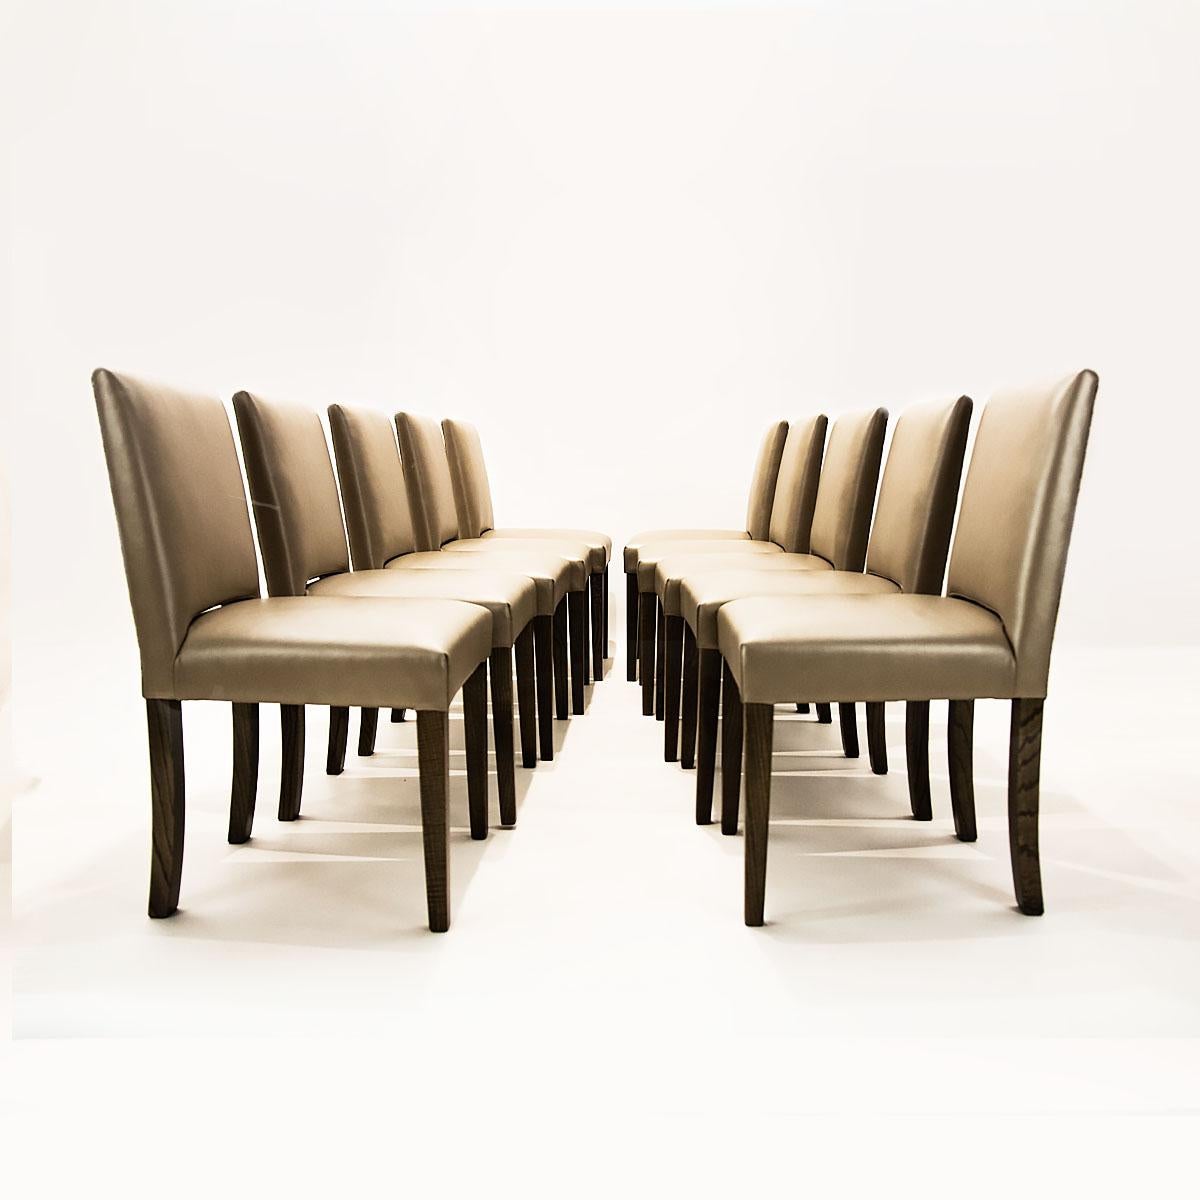 Large 10 Seat Contemporary Dining Set with Bespoke Macassar Table and 10 Chairs For Sale 3